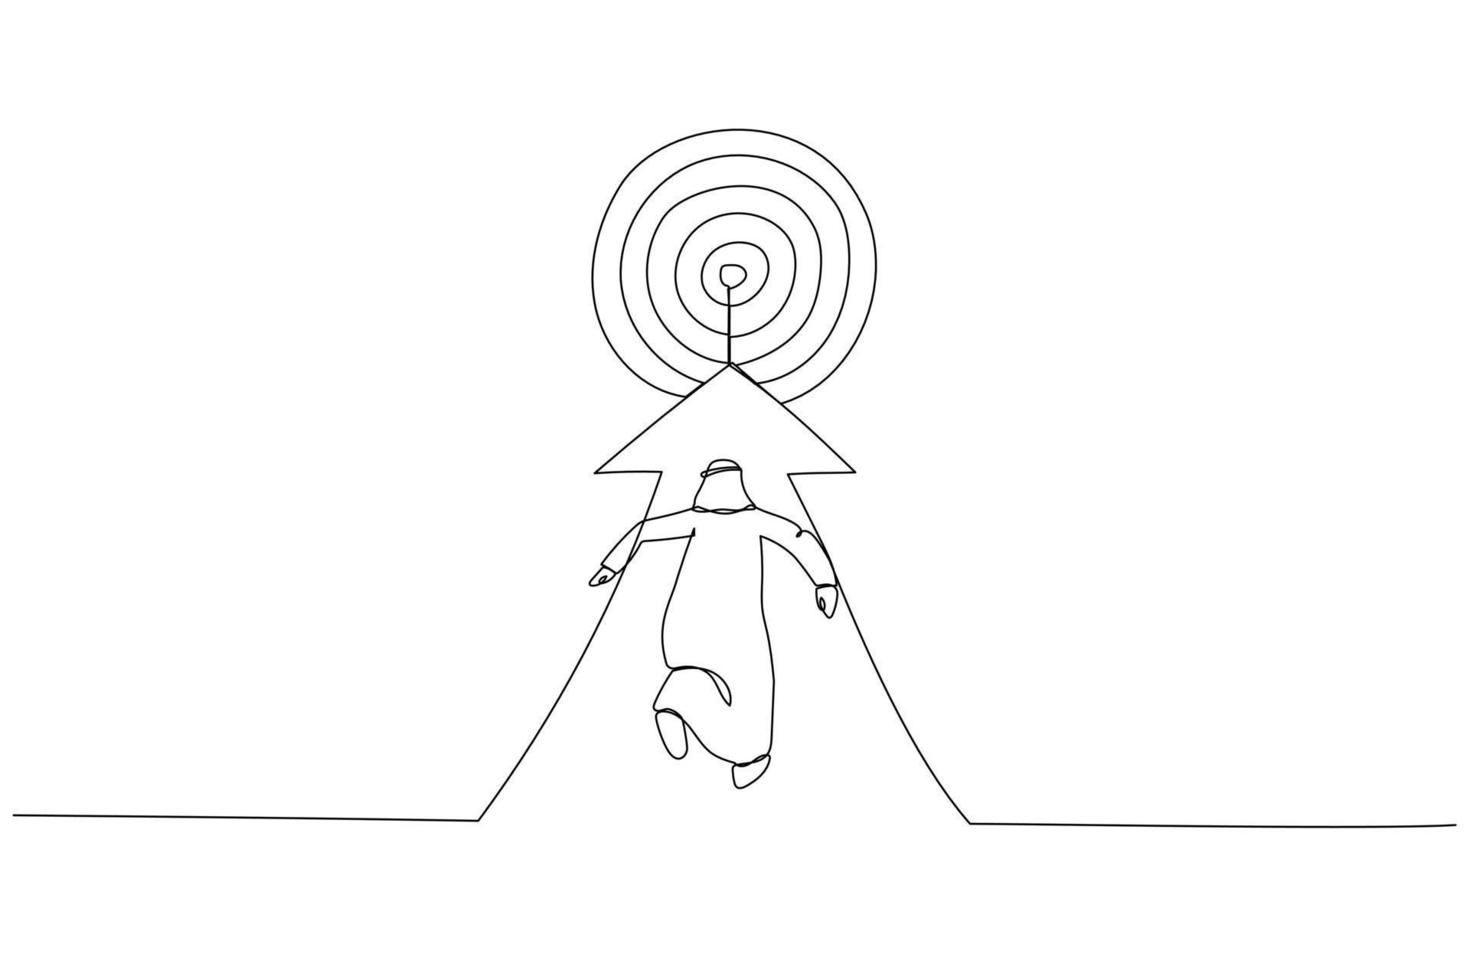 Cartoon of arab businessman running to the target. Metaphor for reaching the target. One continuous line art style vector